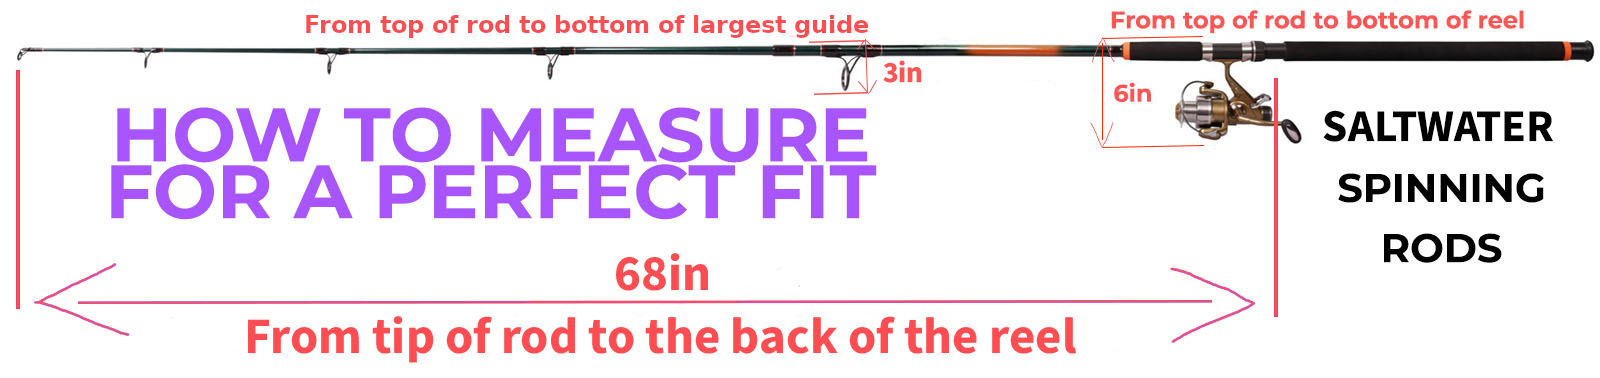 How to measure saltwater spinning rod